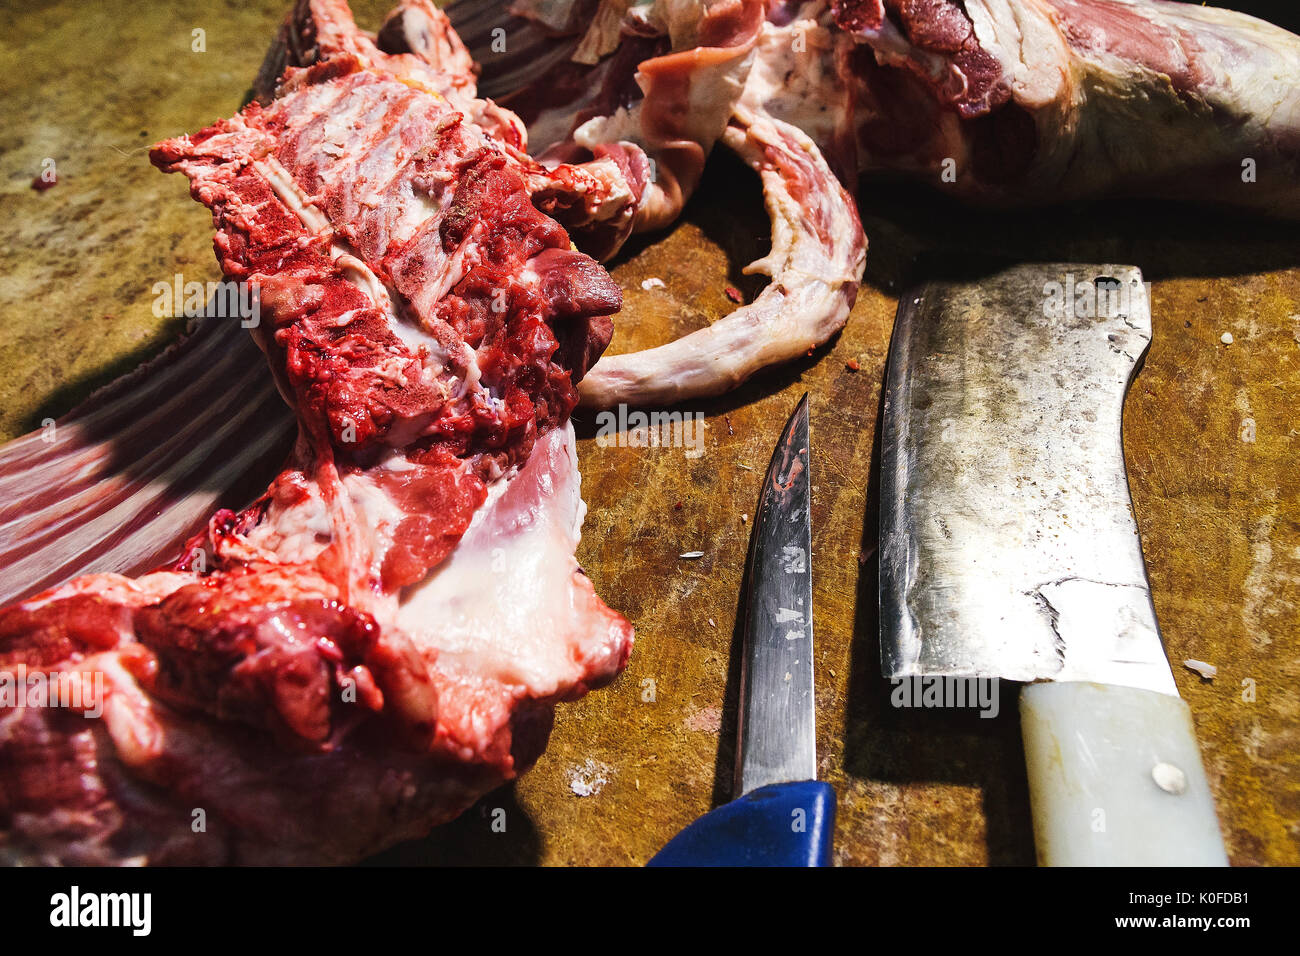 Butchers block with freshly sliced meat Stock Photo